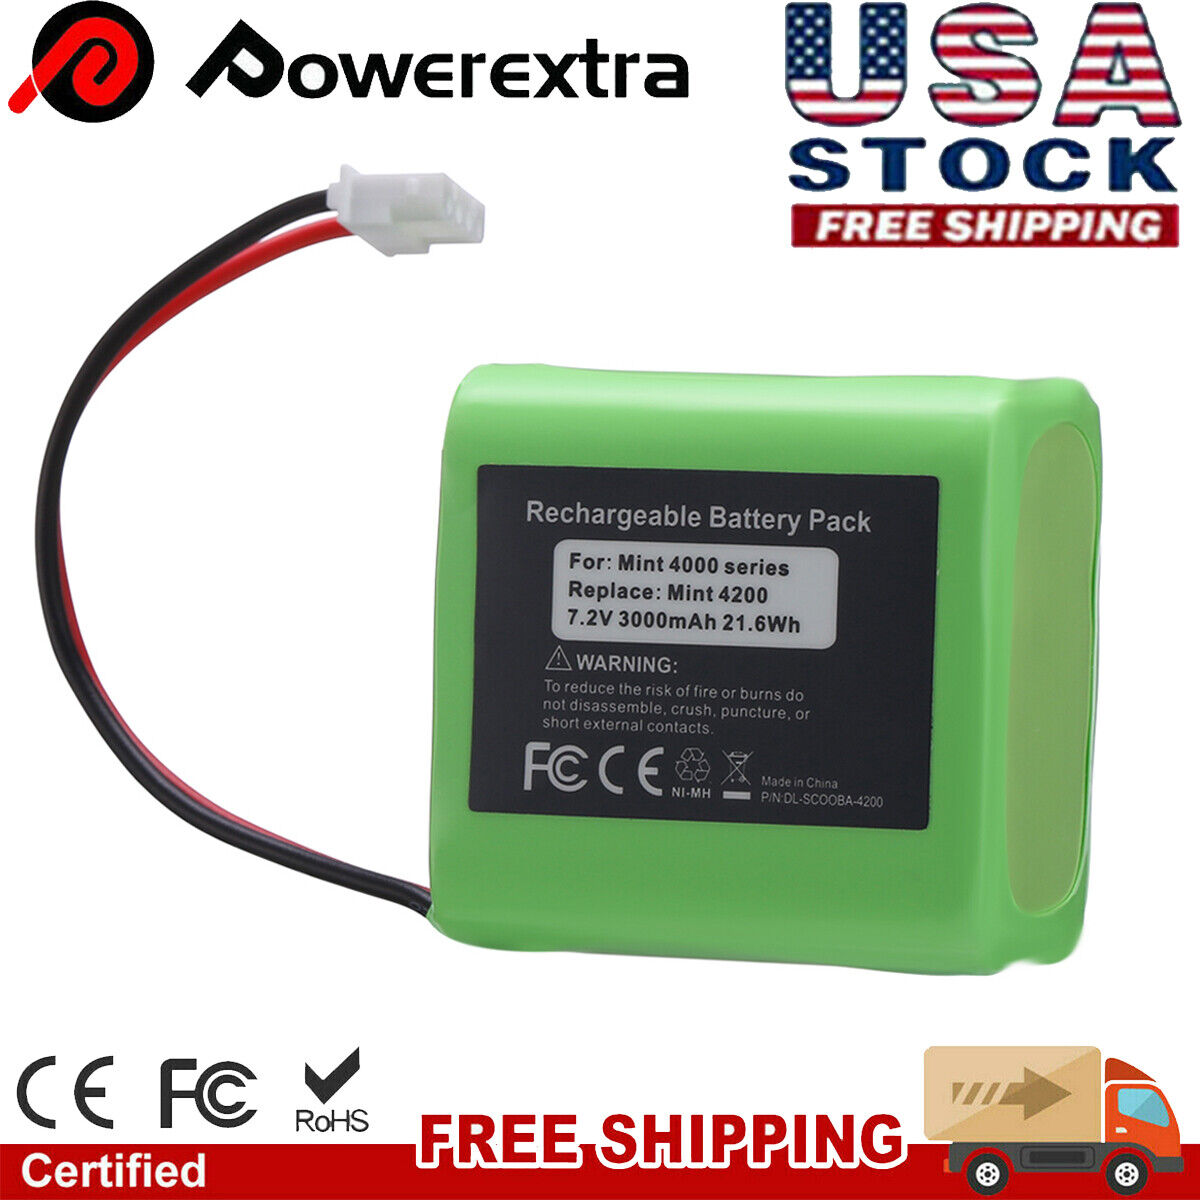 3000mAh 7.2V Replacement Battery For iRobot Braava Mint 4200/4205 & 320/321 New Powerextra Does not apply